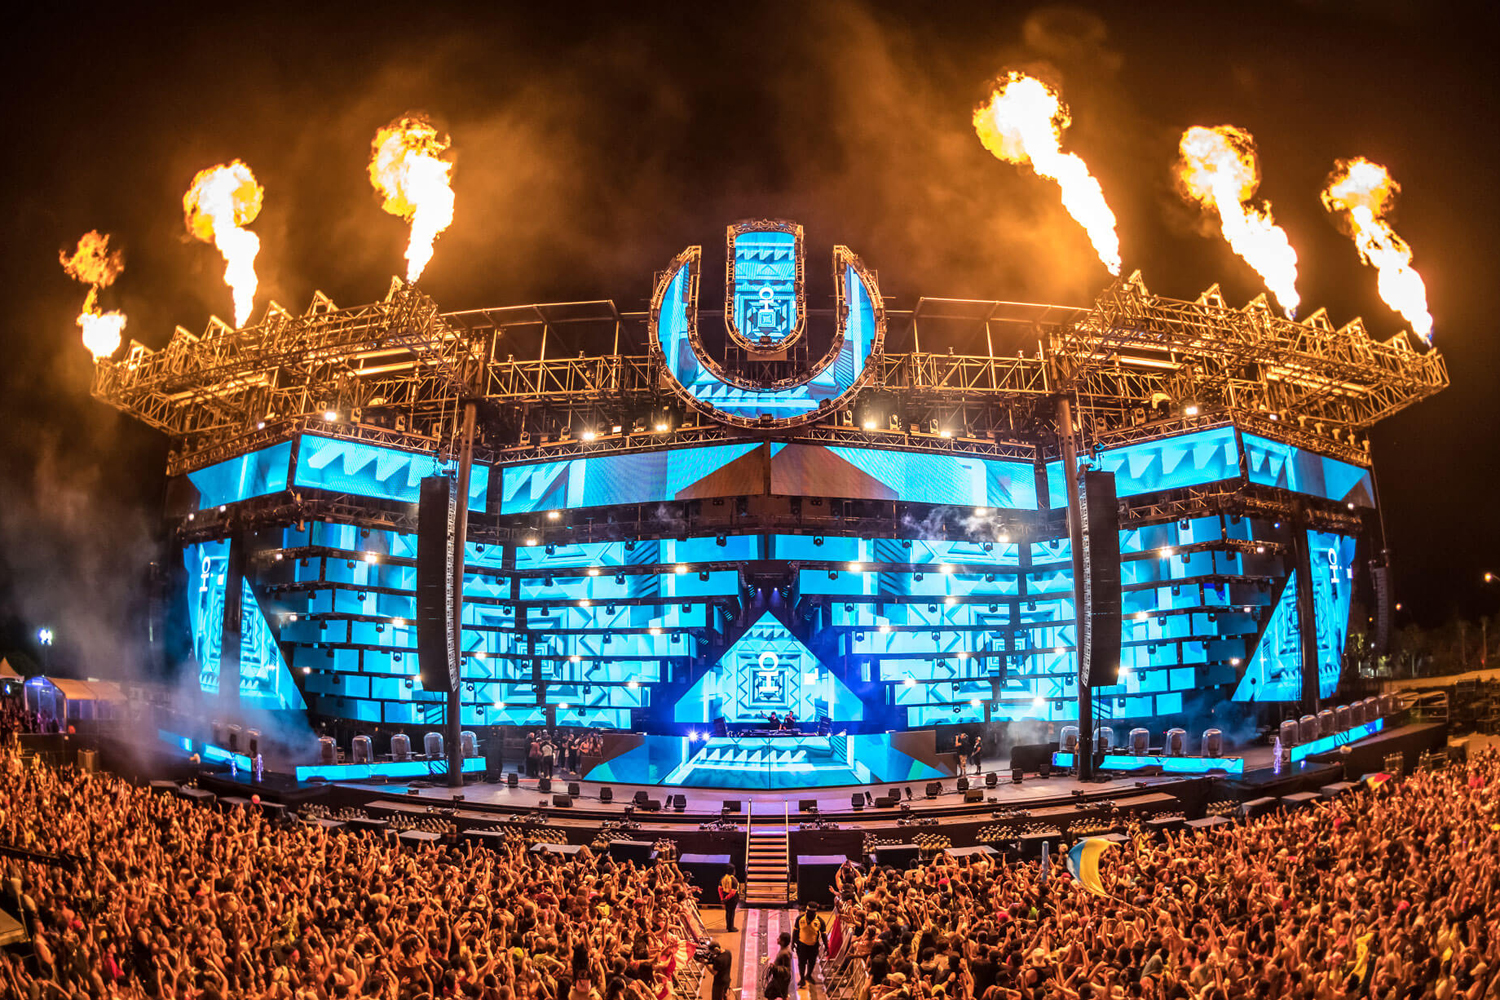 Venue announced and tickets go on sale for Abu Dhabi’s first Ultra